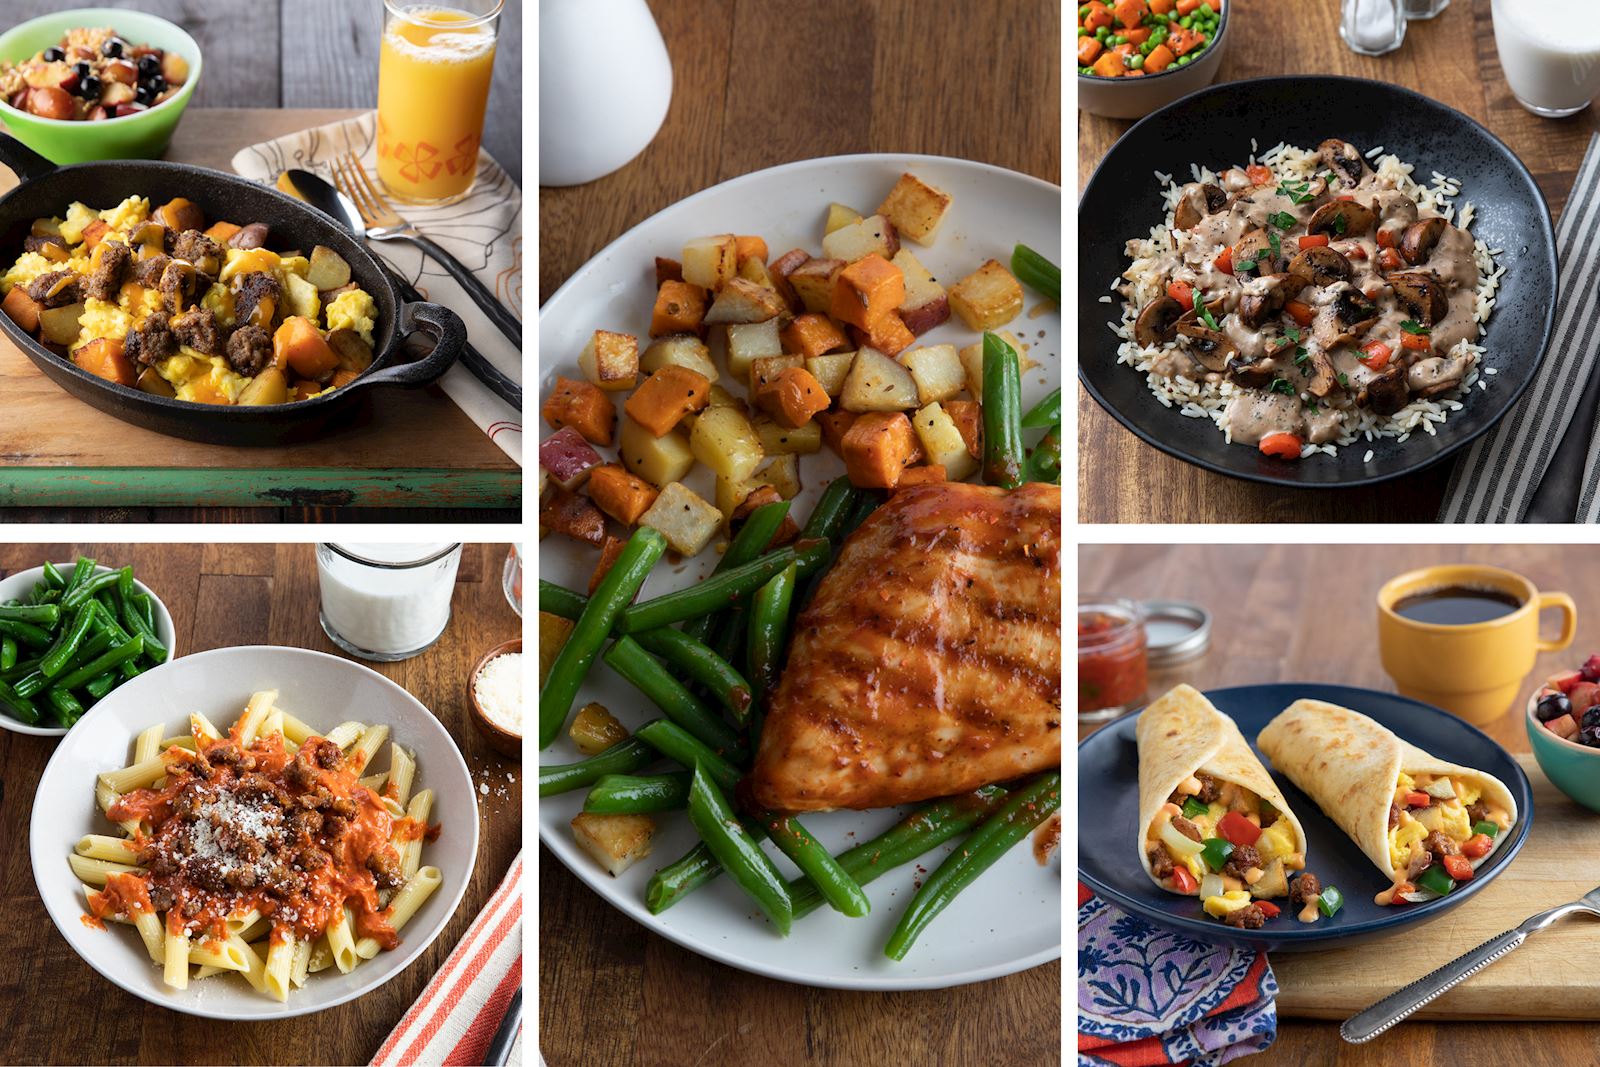 The power of meal choice is yours with Mom's Meals®